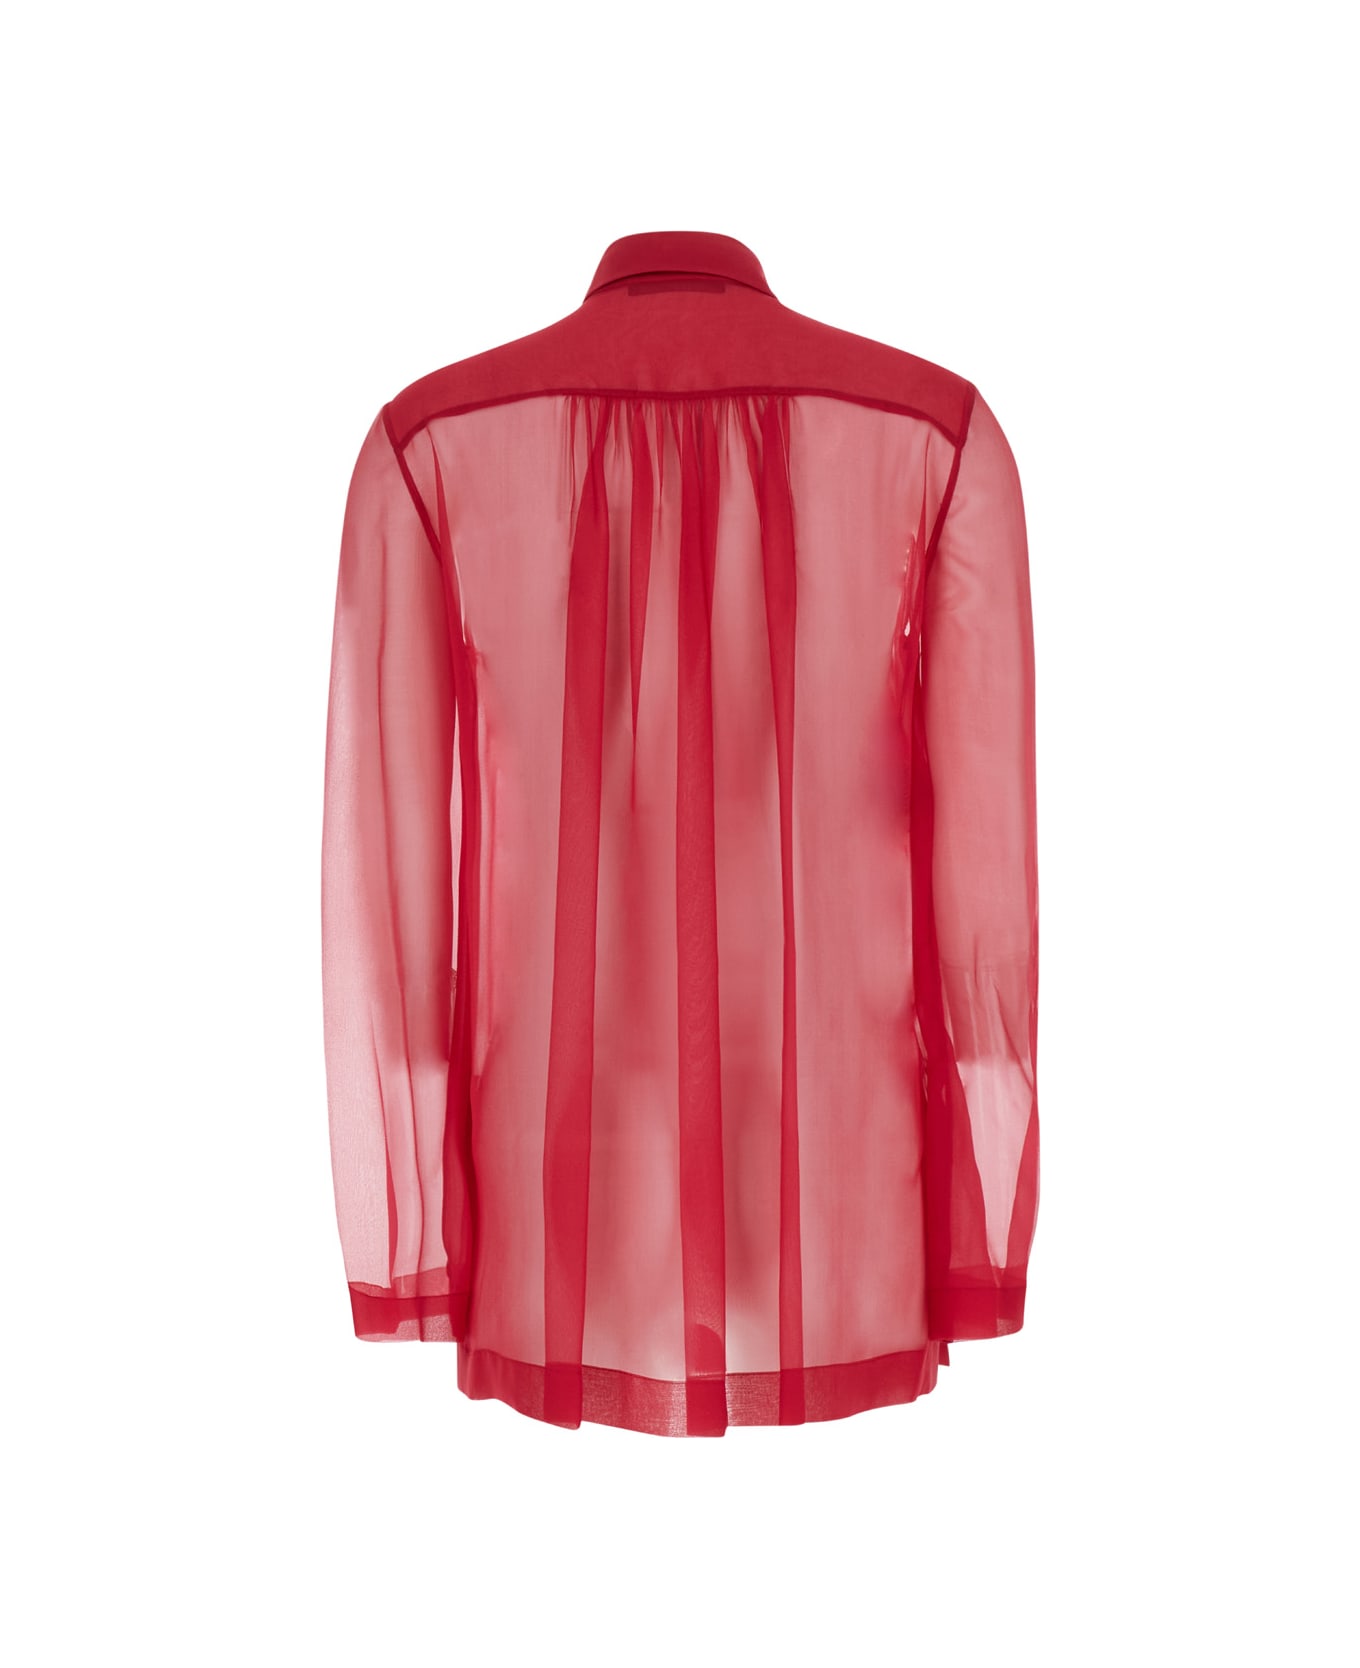 Alberta Ferretti Red Shirt With Pointed Collar In Chiffon Woman - Red シャツ